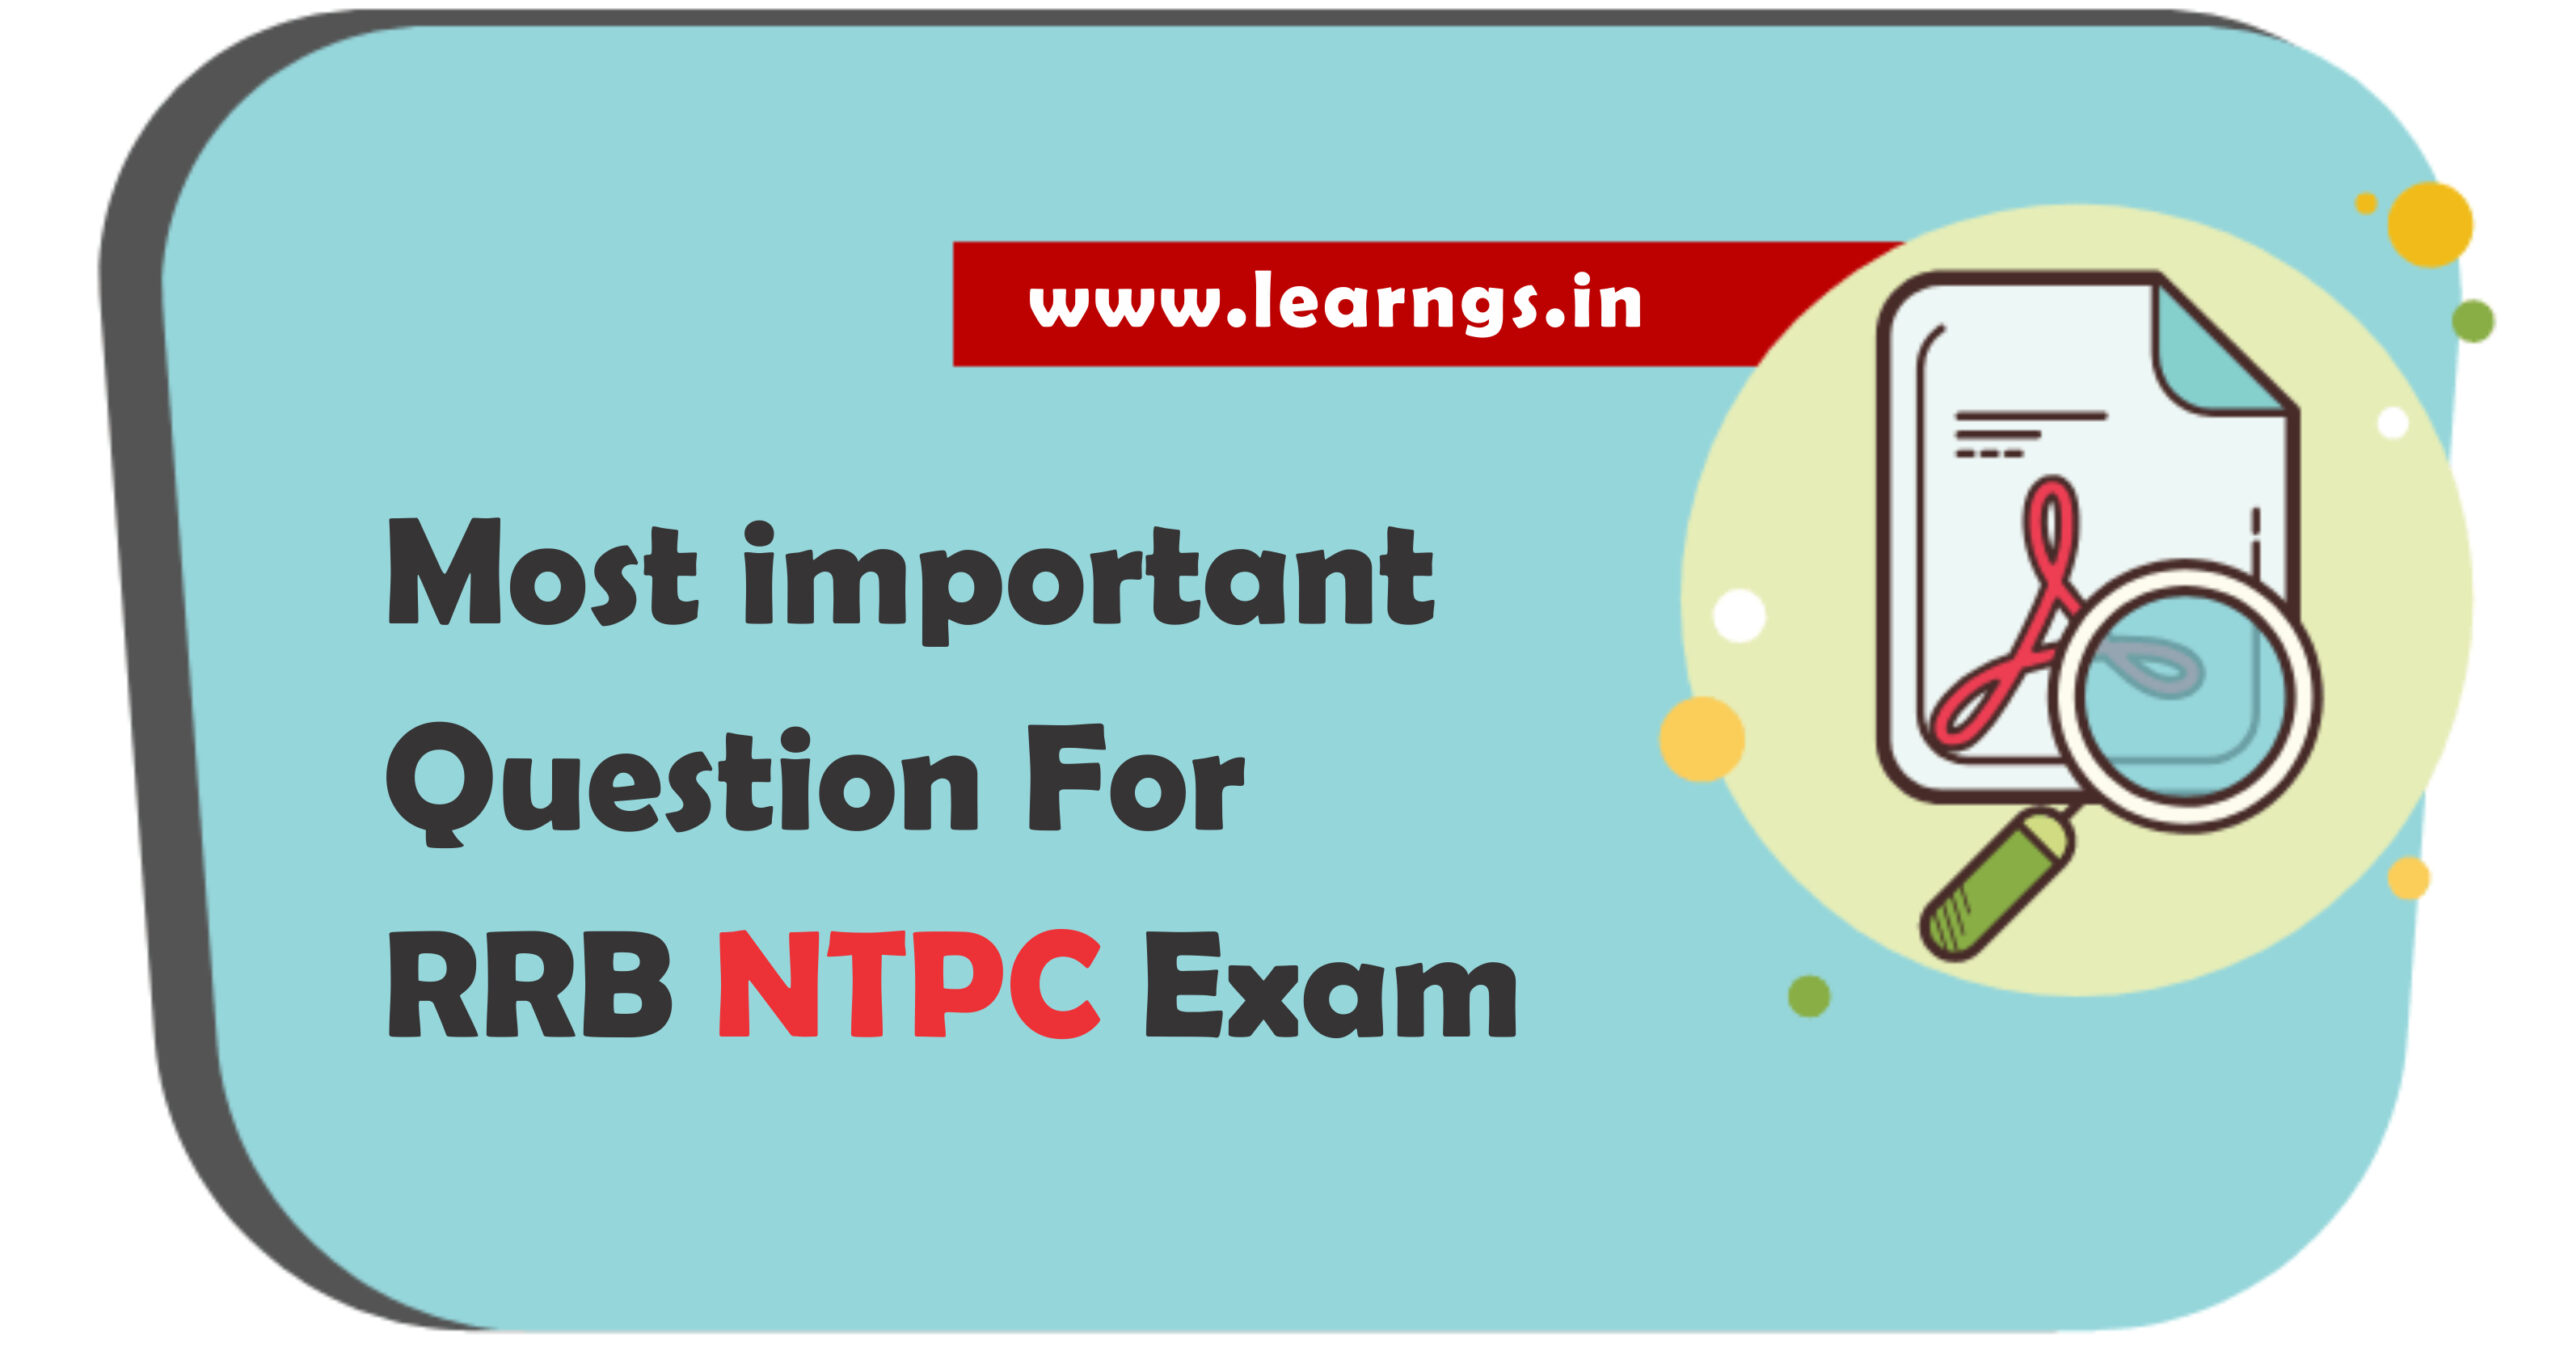 Most Important Question For RRB NTPC EXAM